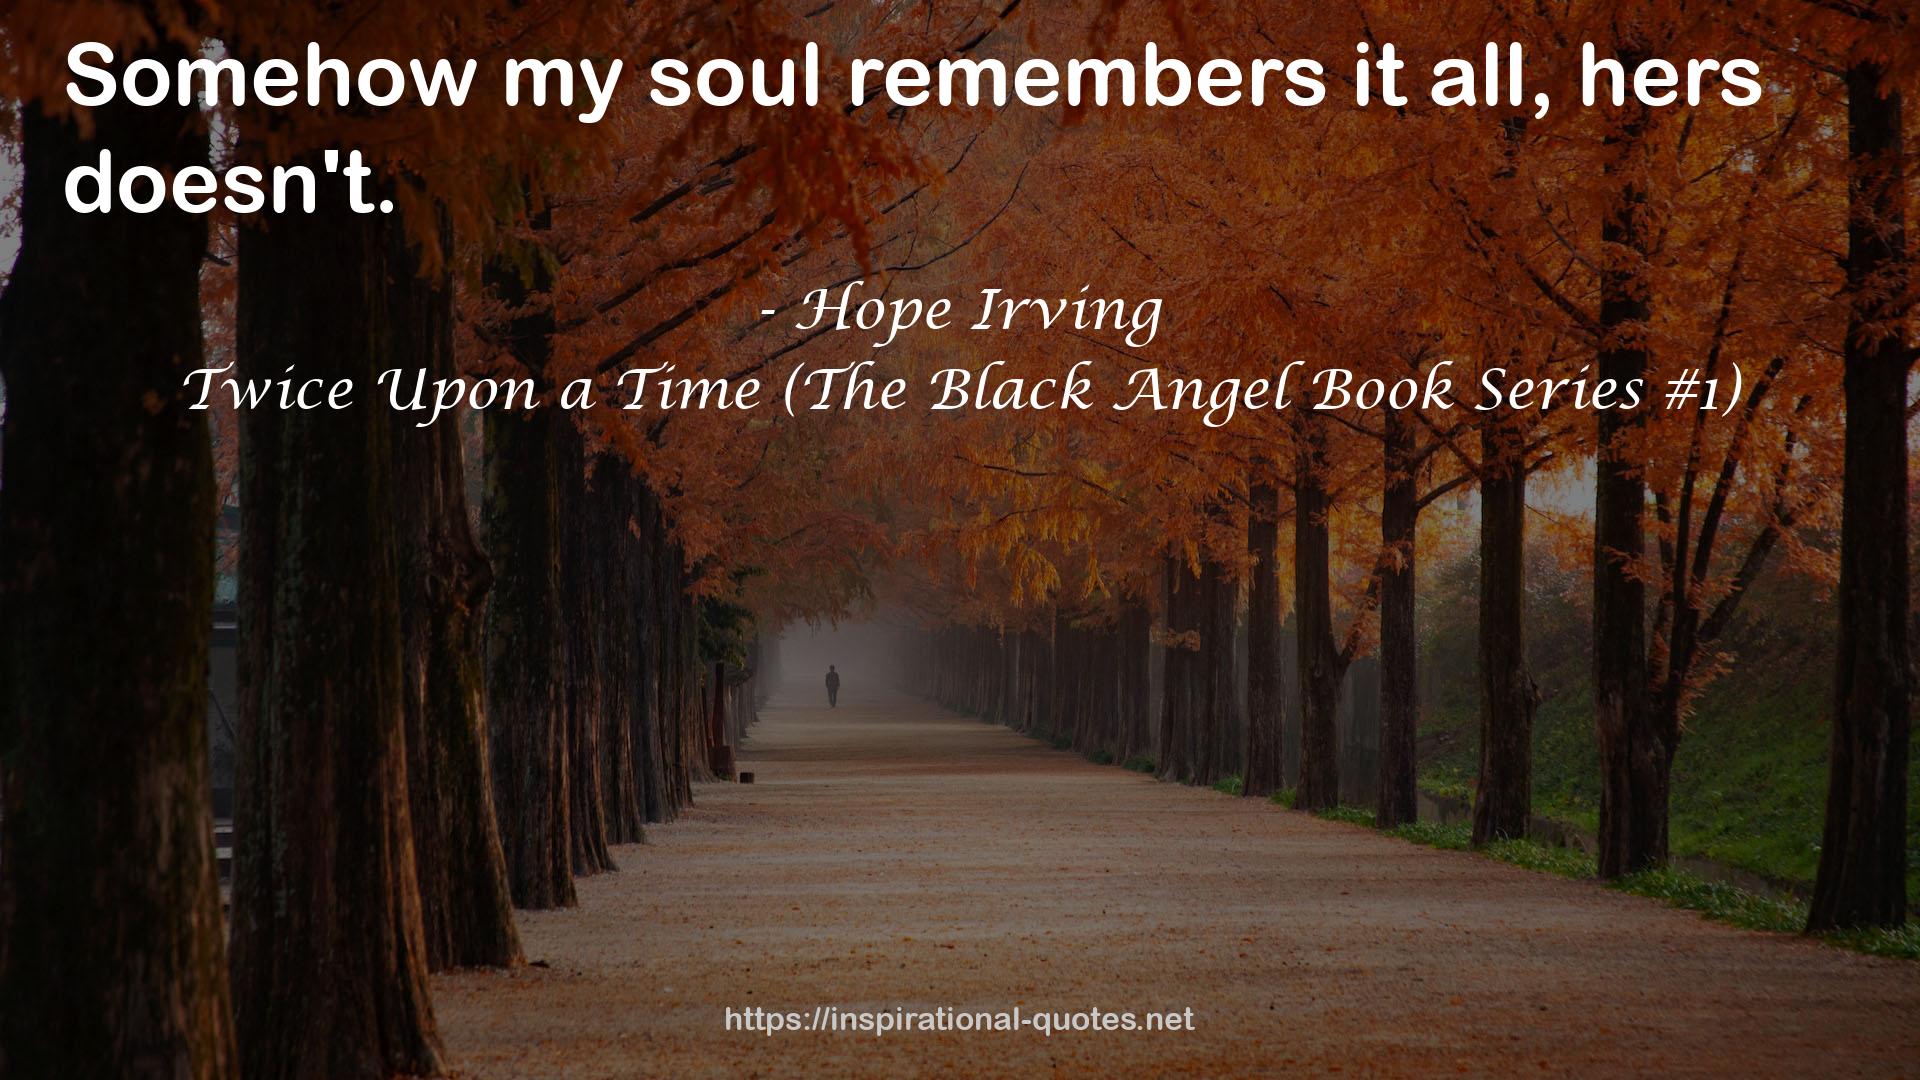 Twice Upon a Time (The Black Angel Book Series #1) QUOTES